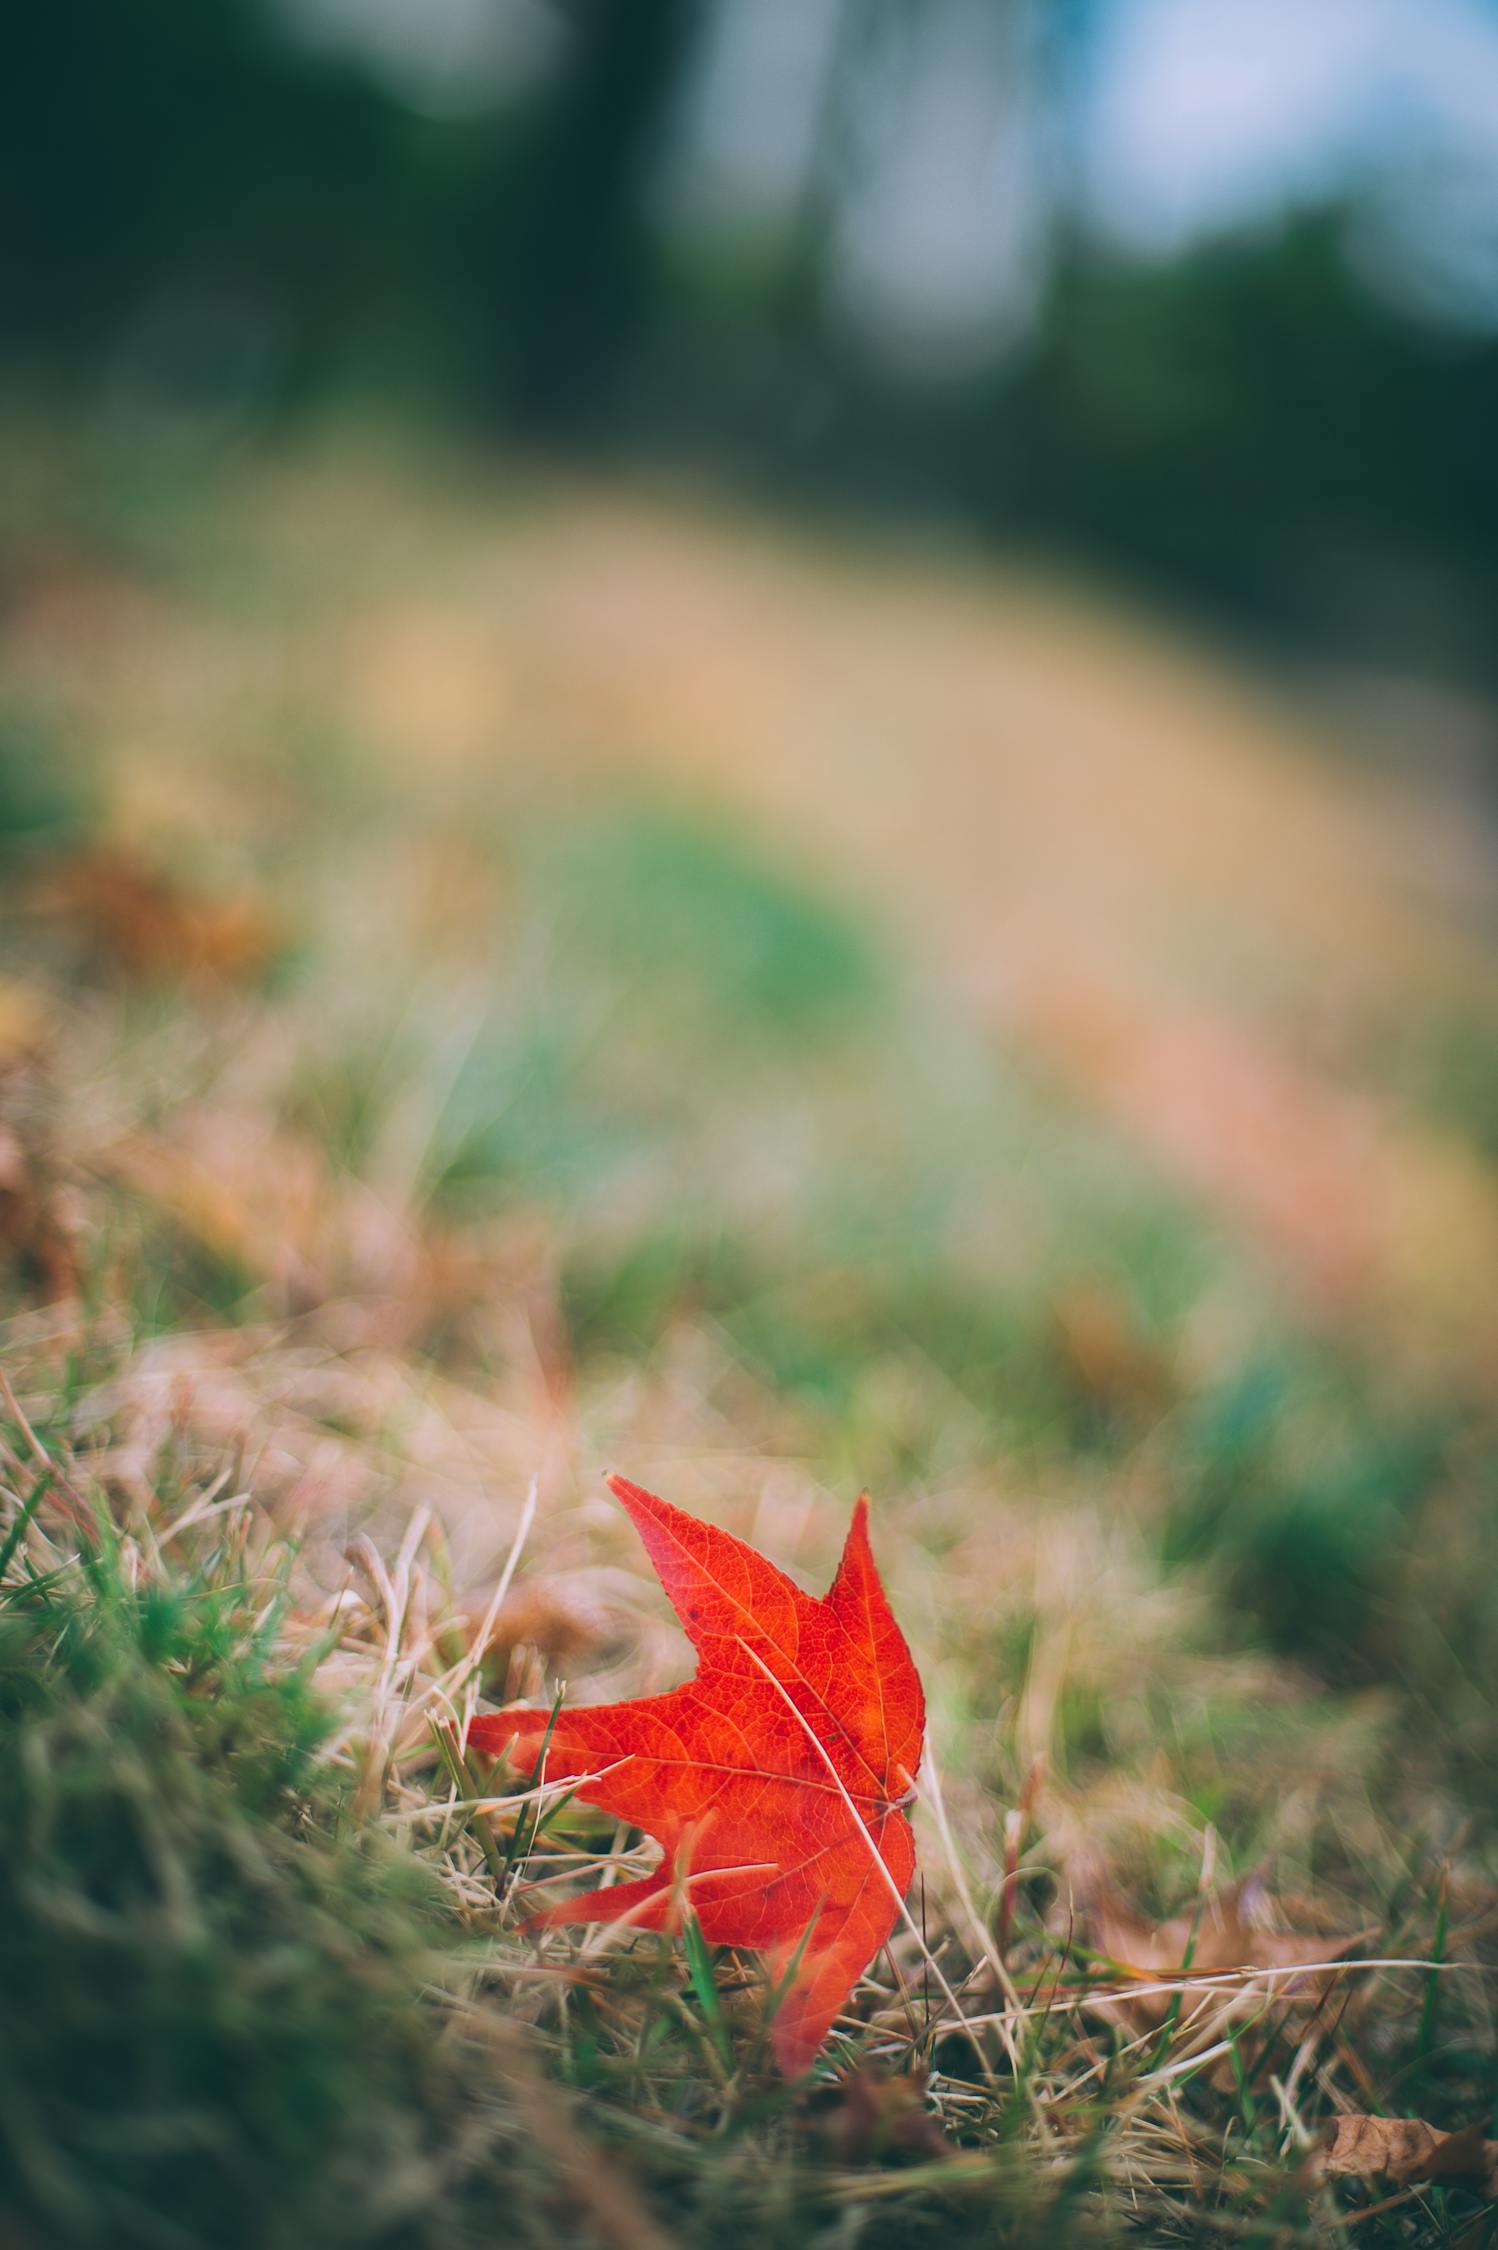 Free stock photo of maple leaves, red